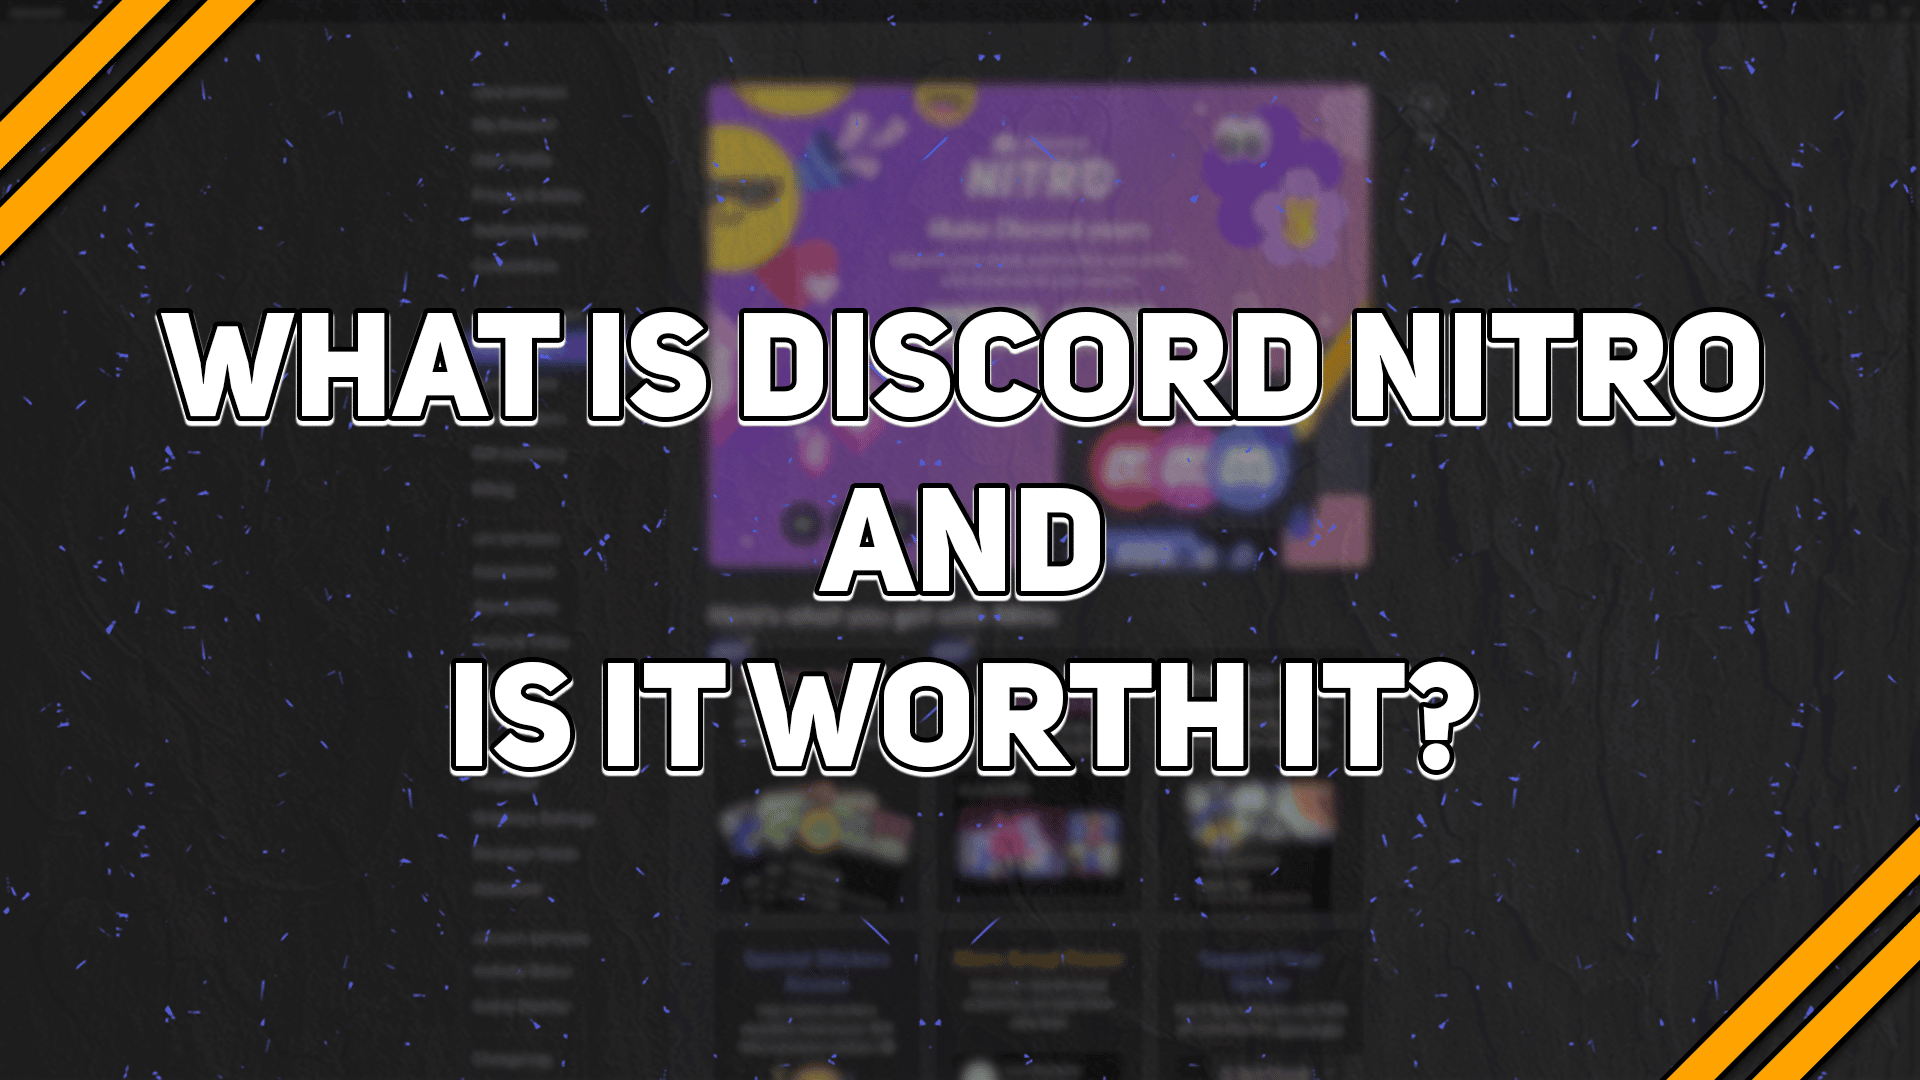 What Is Discord Nitro, and Is It Worth It